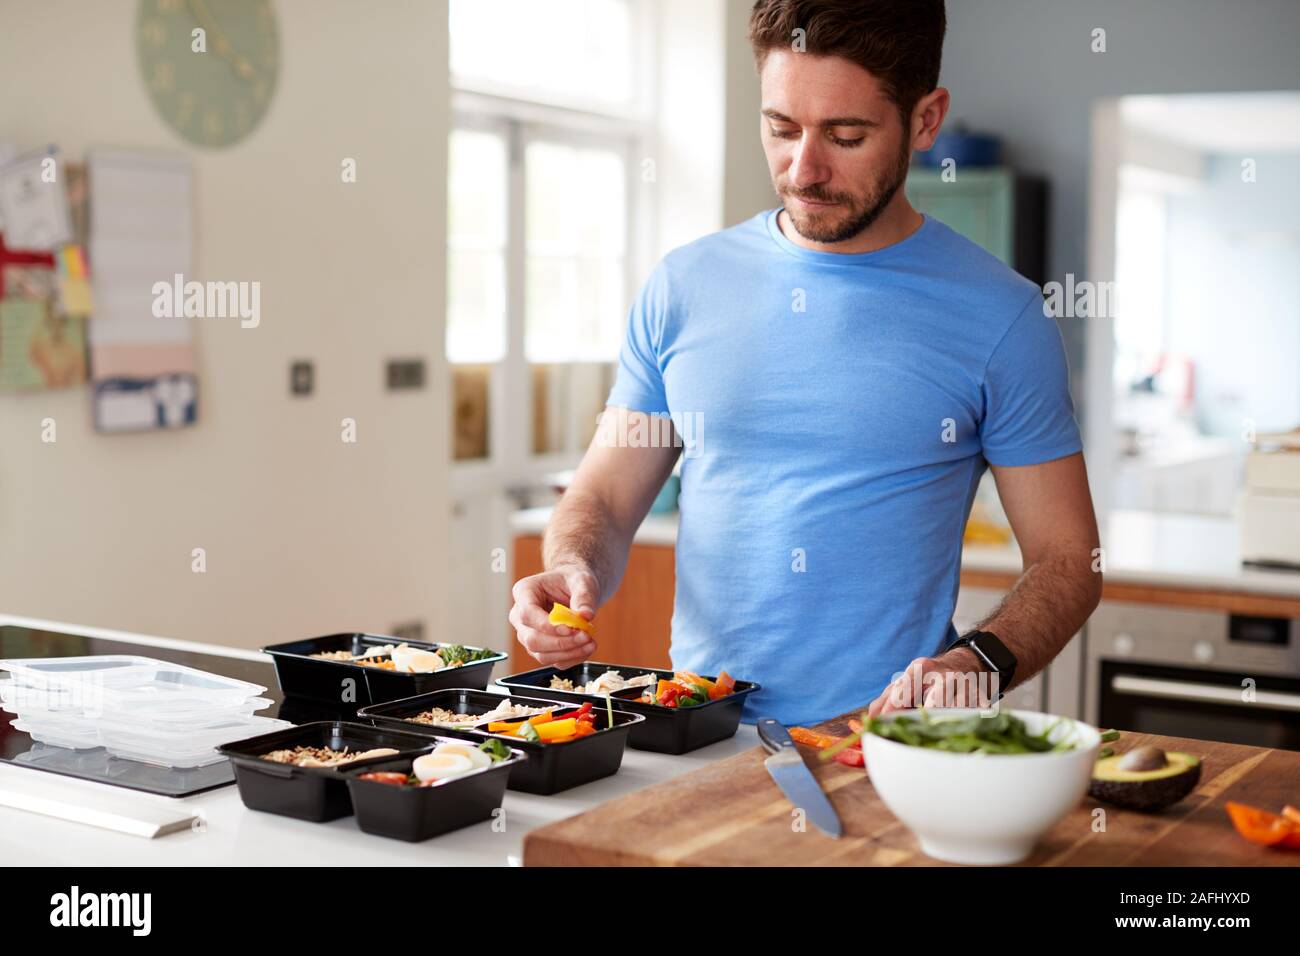 Man Preparing Batch Of Healthy Meals At Home In Kitchen Stock Photo